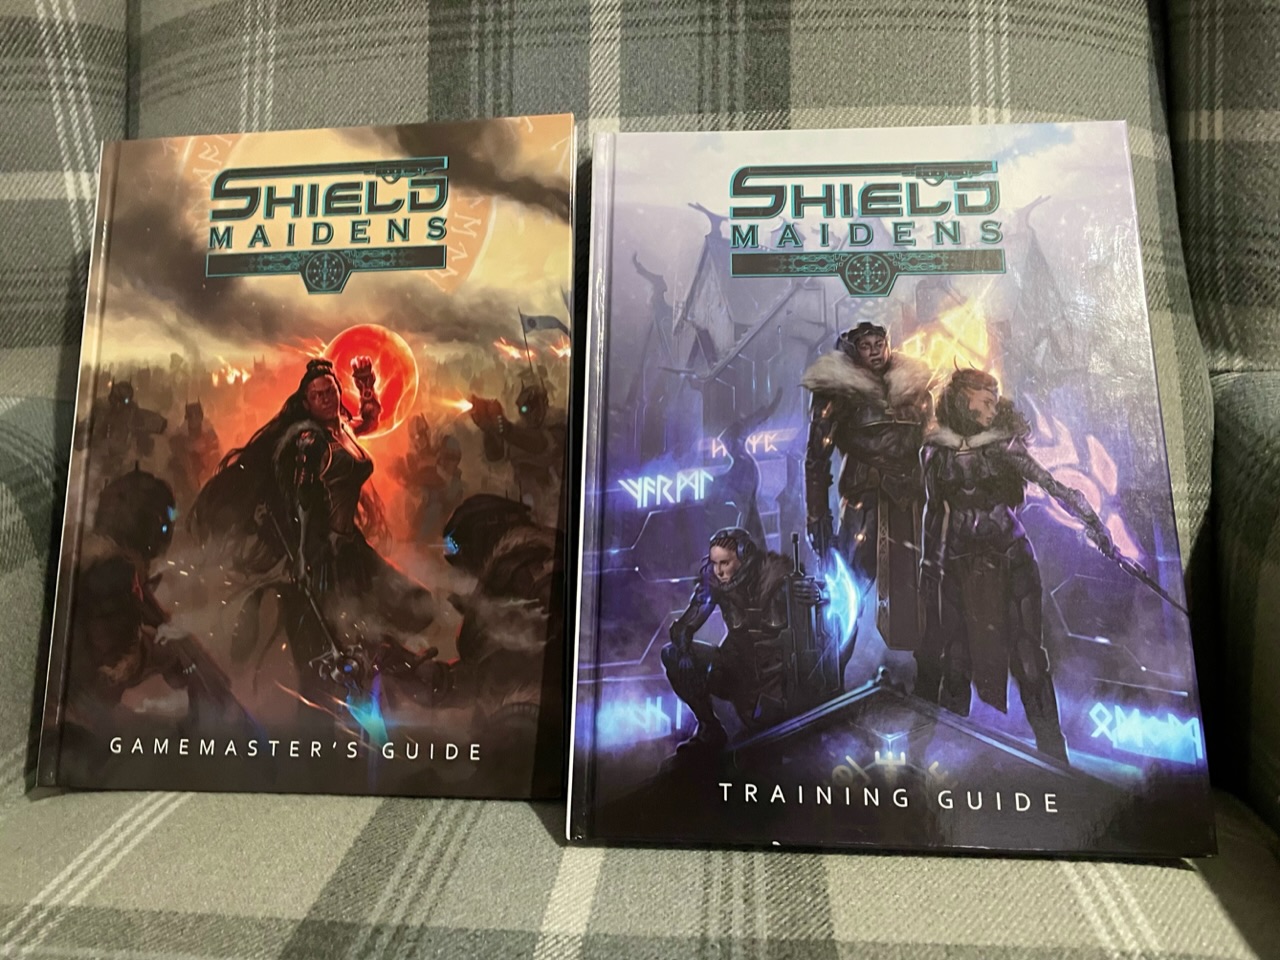 Shield Maidens RPG Is Released By Mongoose Publishing